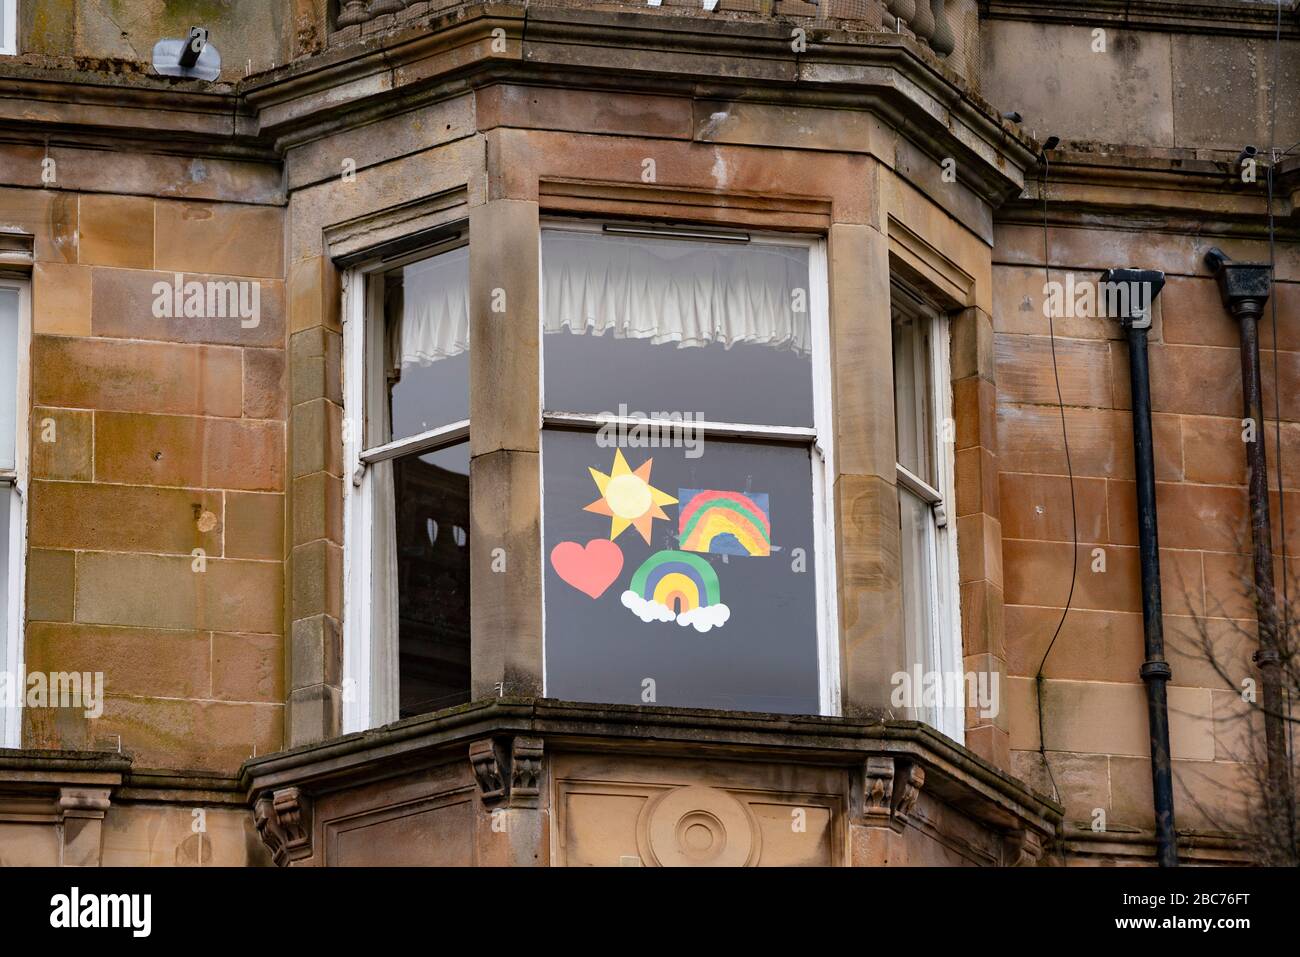 Glasgow, Scotland, UK. 3 April, 2020. Images from the south side of Glasgow at the end of the second week of Coronavirus lockdown. Pictured; hand drawn rainbows and messages in windows of flat in Govanhill. Iain Masterton/Alamy Live News Stock Photo